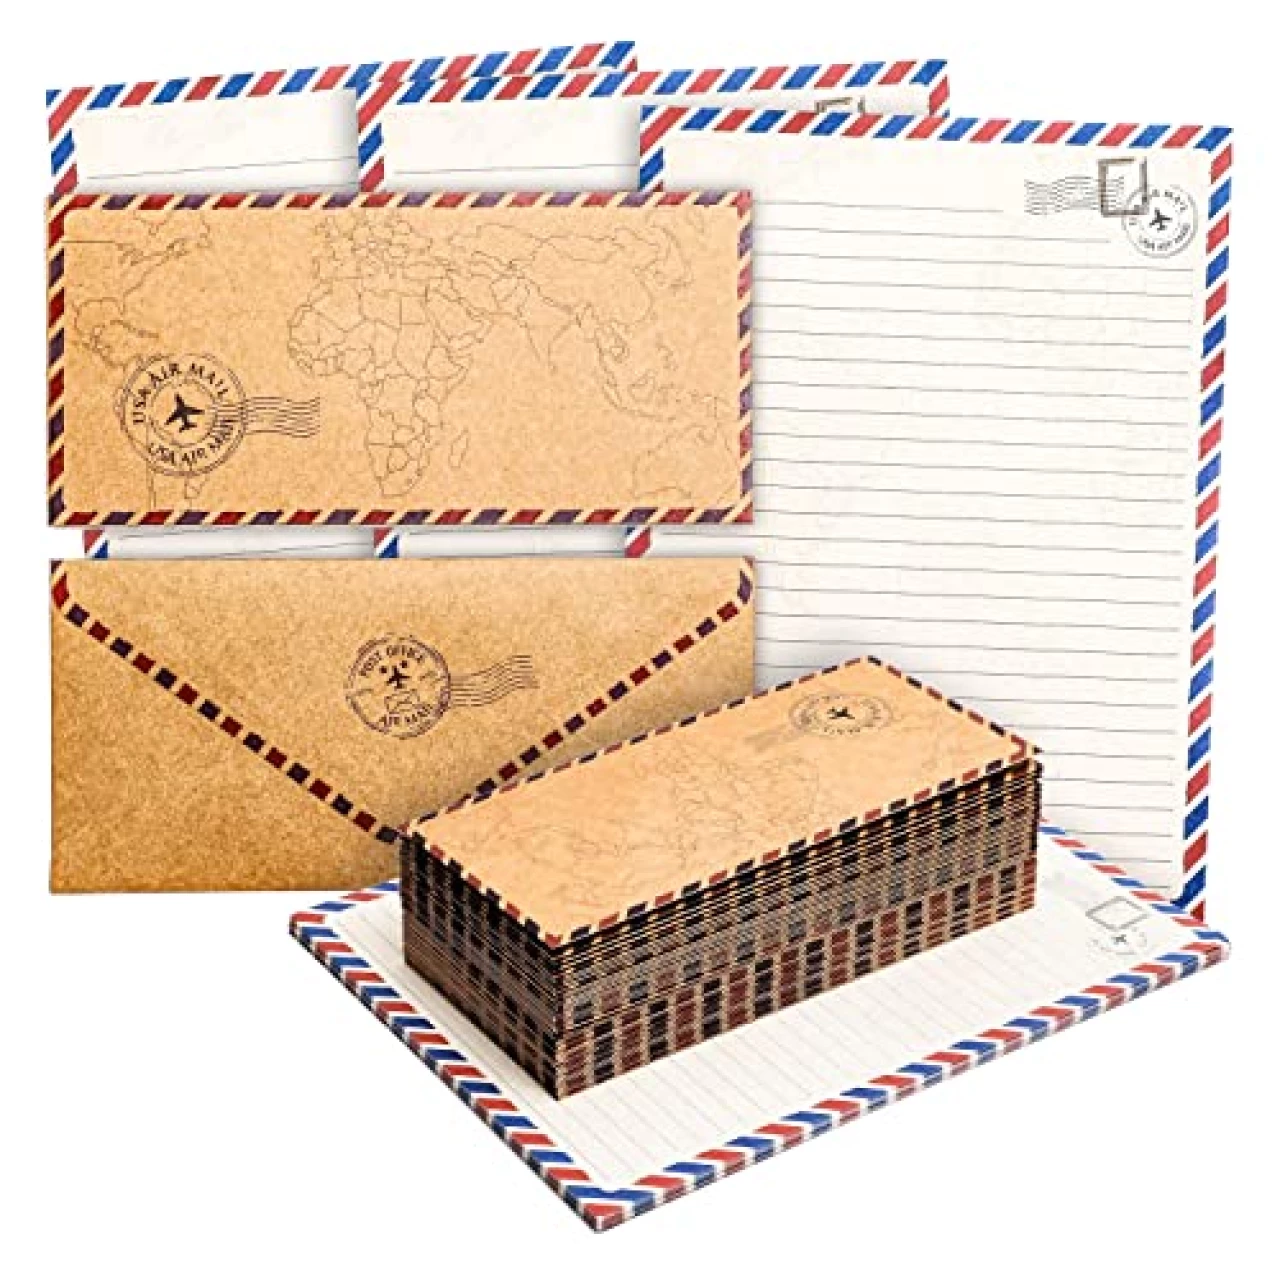 96 Pack Vintage-Style Airmail Stationery Set (48 Lined Paper Sheets with Matching Envelopes)